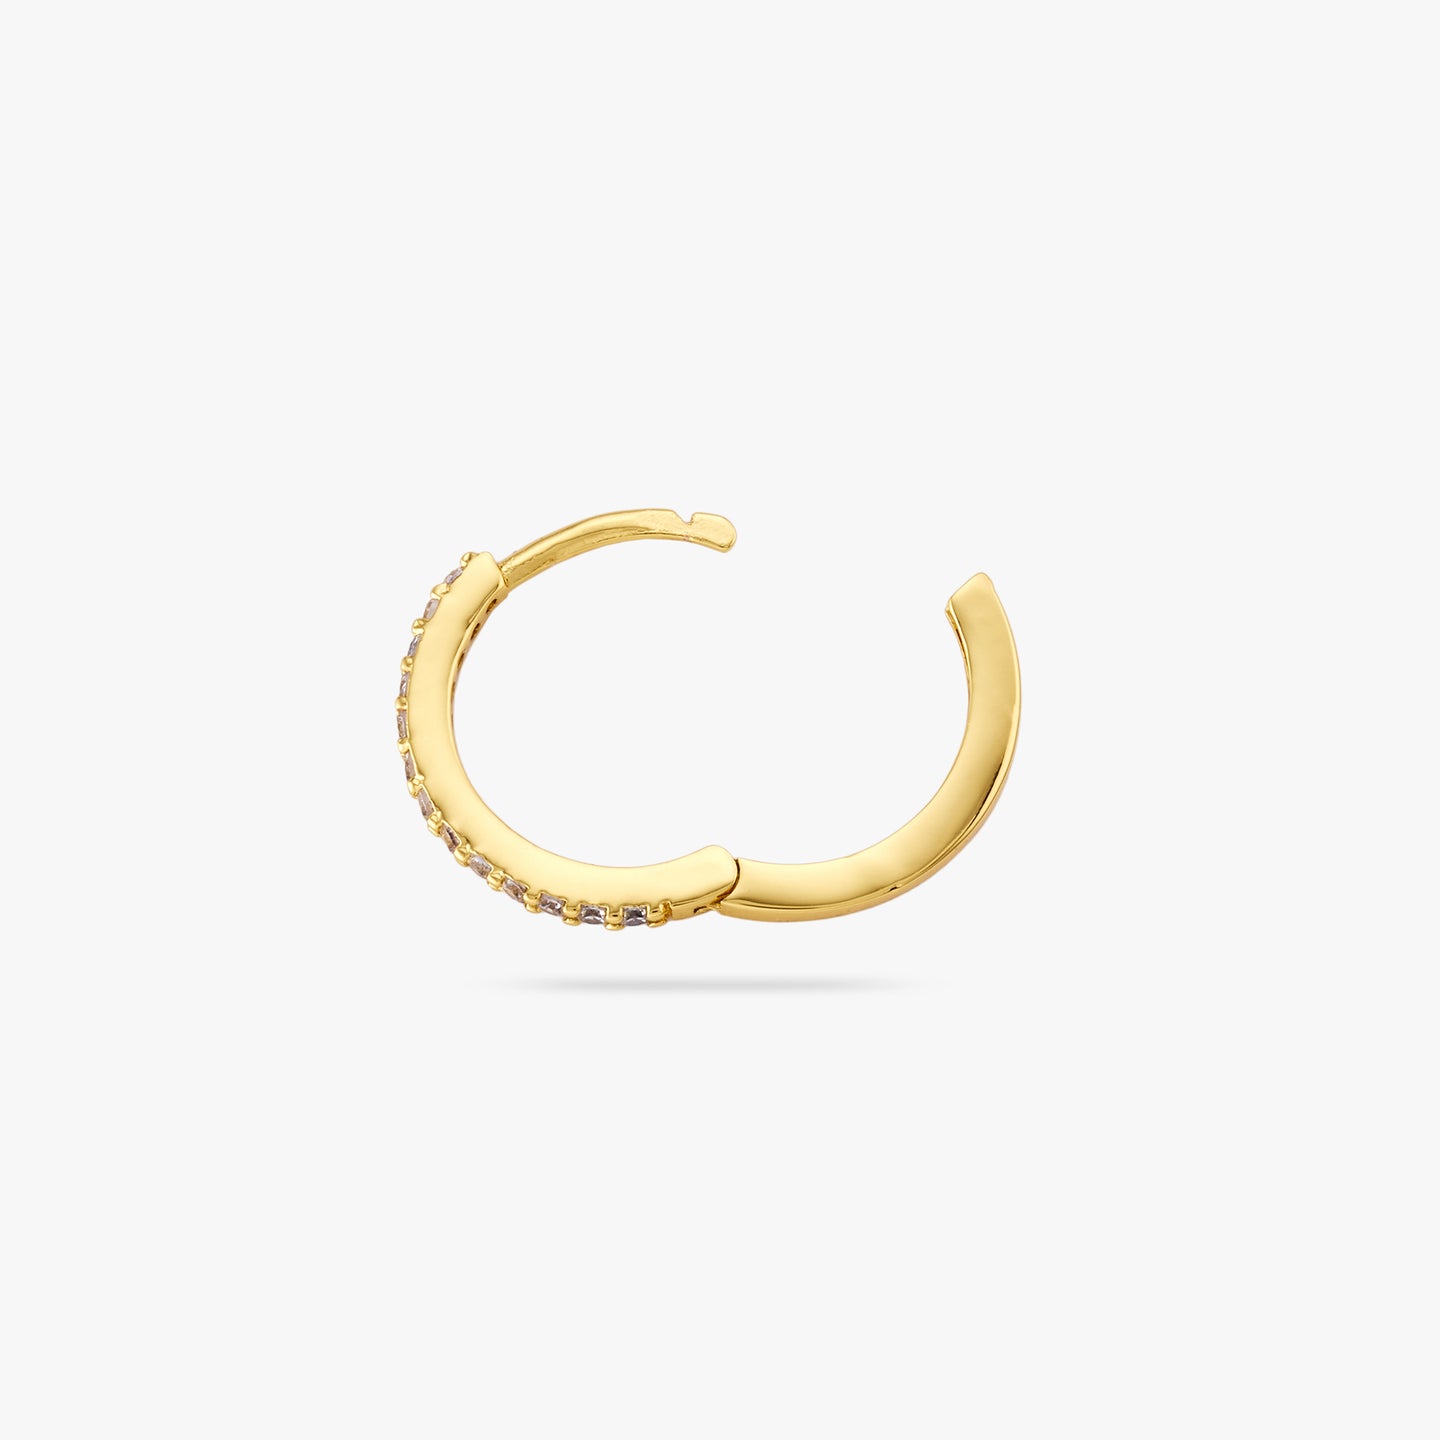 This is a small gold hoop with clear cz gems along the front and the clasp is undone color:null|gold/clear